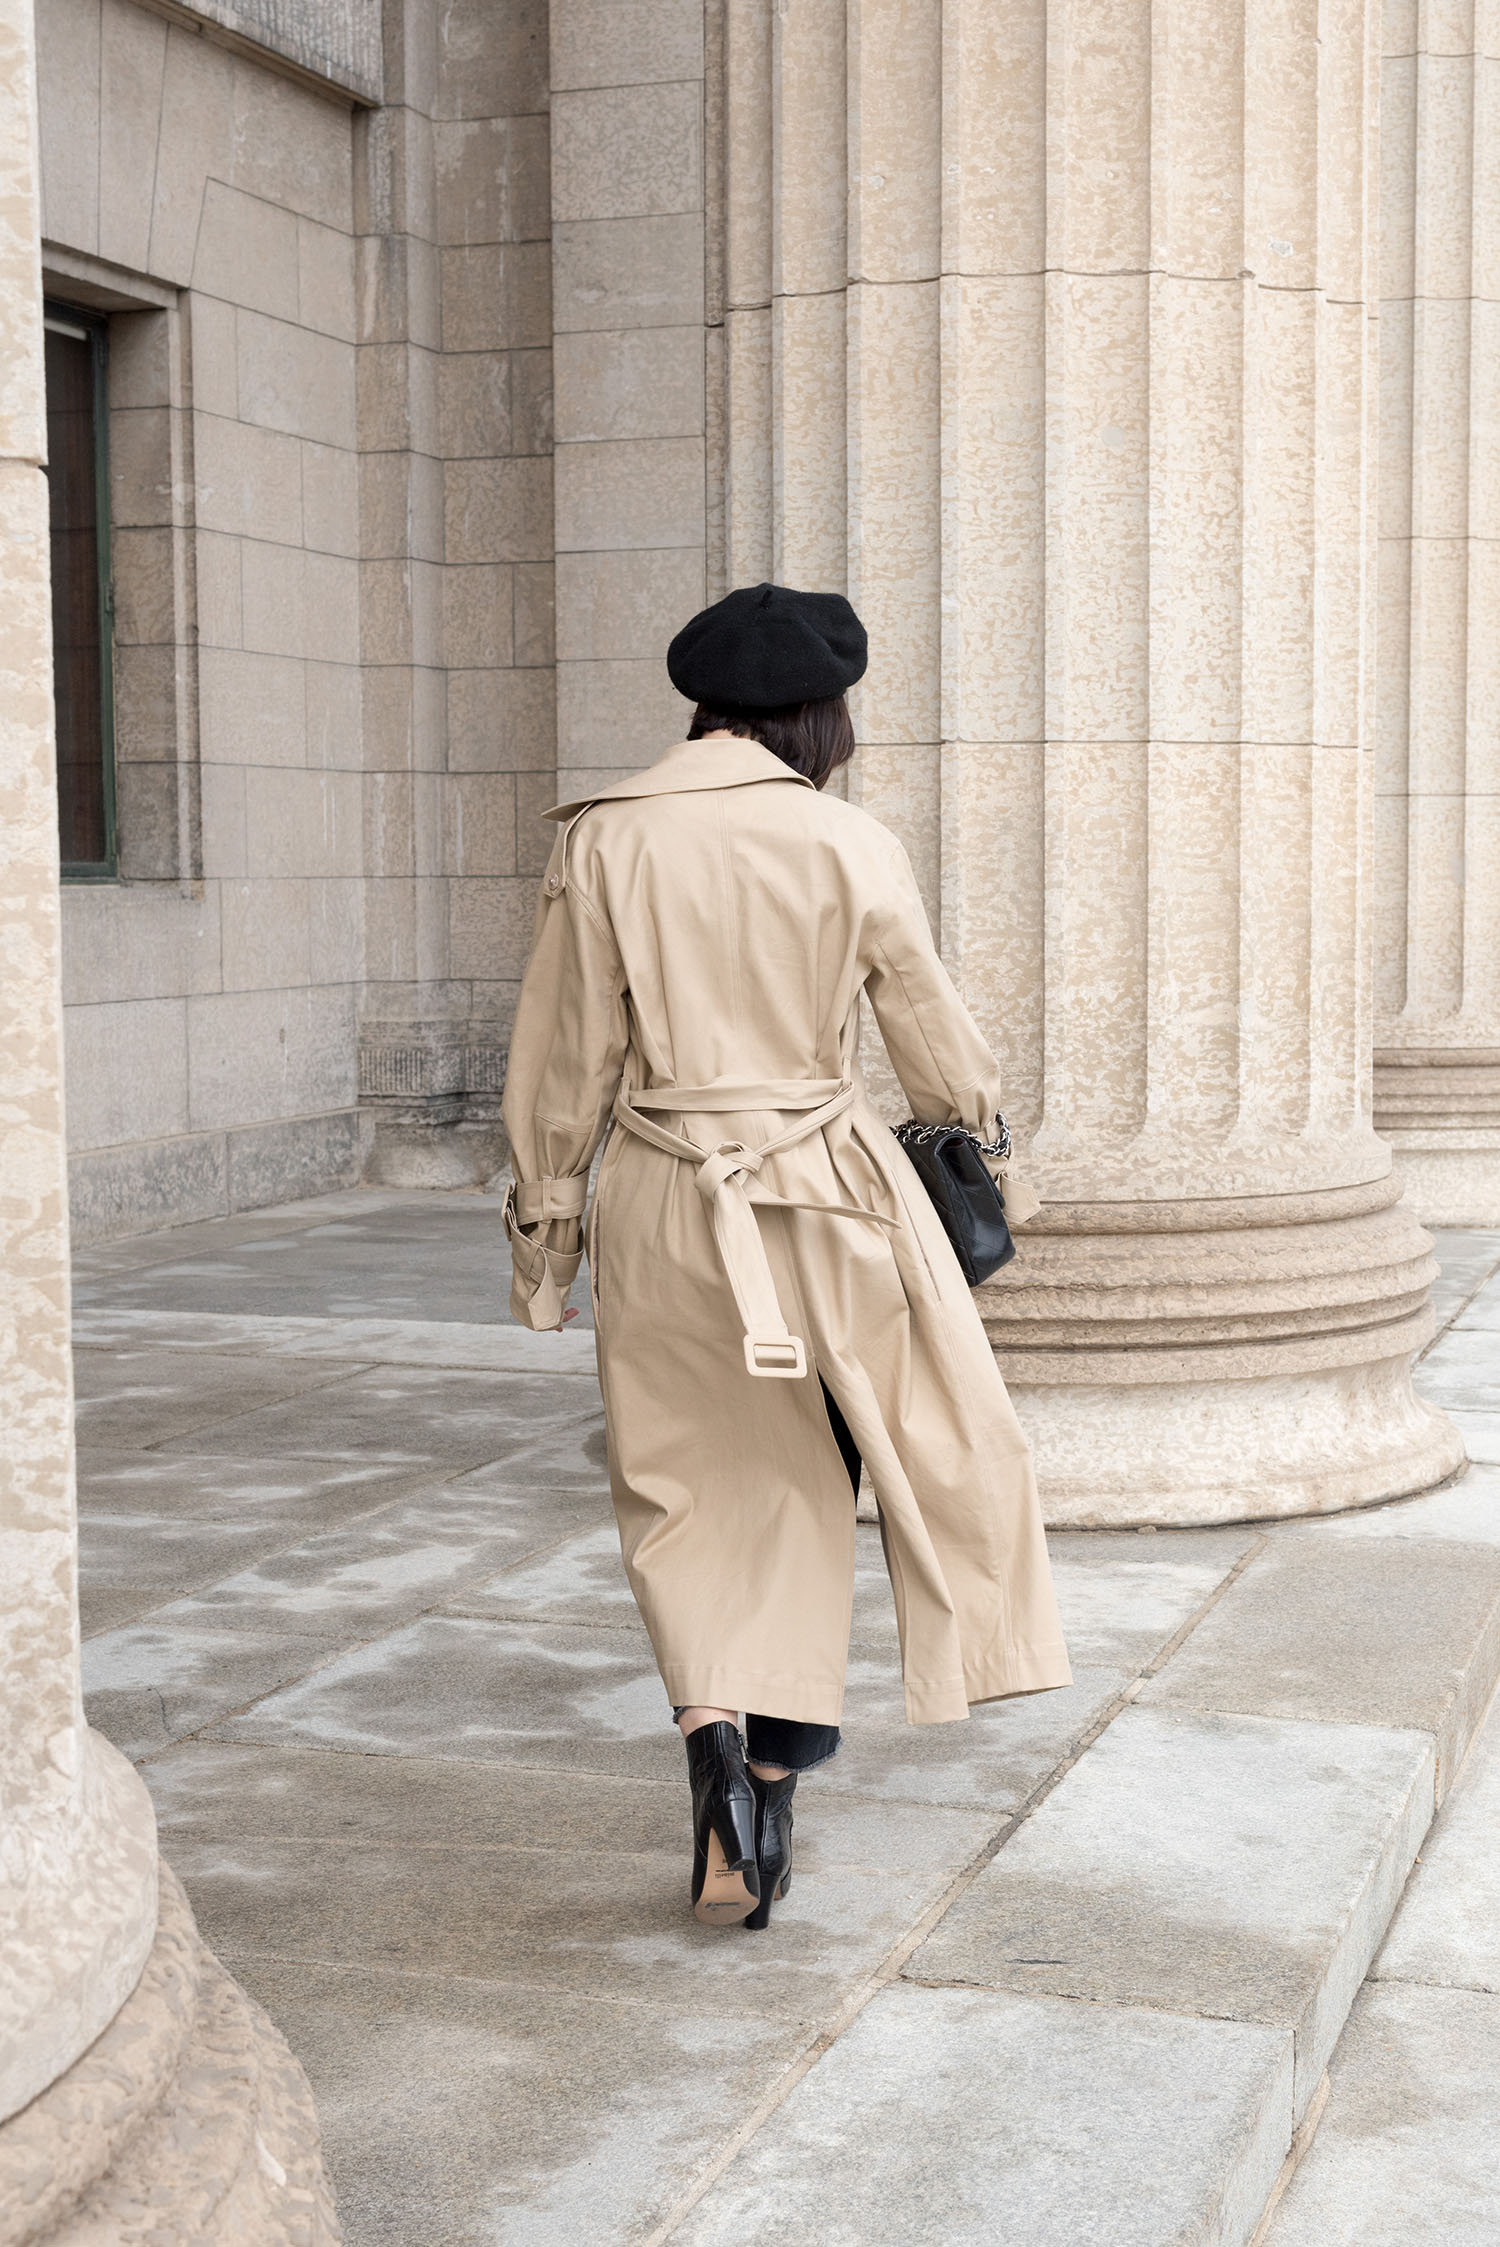 Top Canadian fashion blogger Cee Fardoe of Coco & Vera walks outside the Manitoba Legislature wearing an H&M trench coat and carrying a Chanel handbag